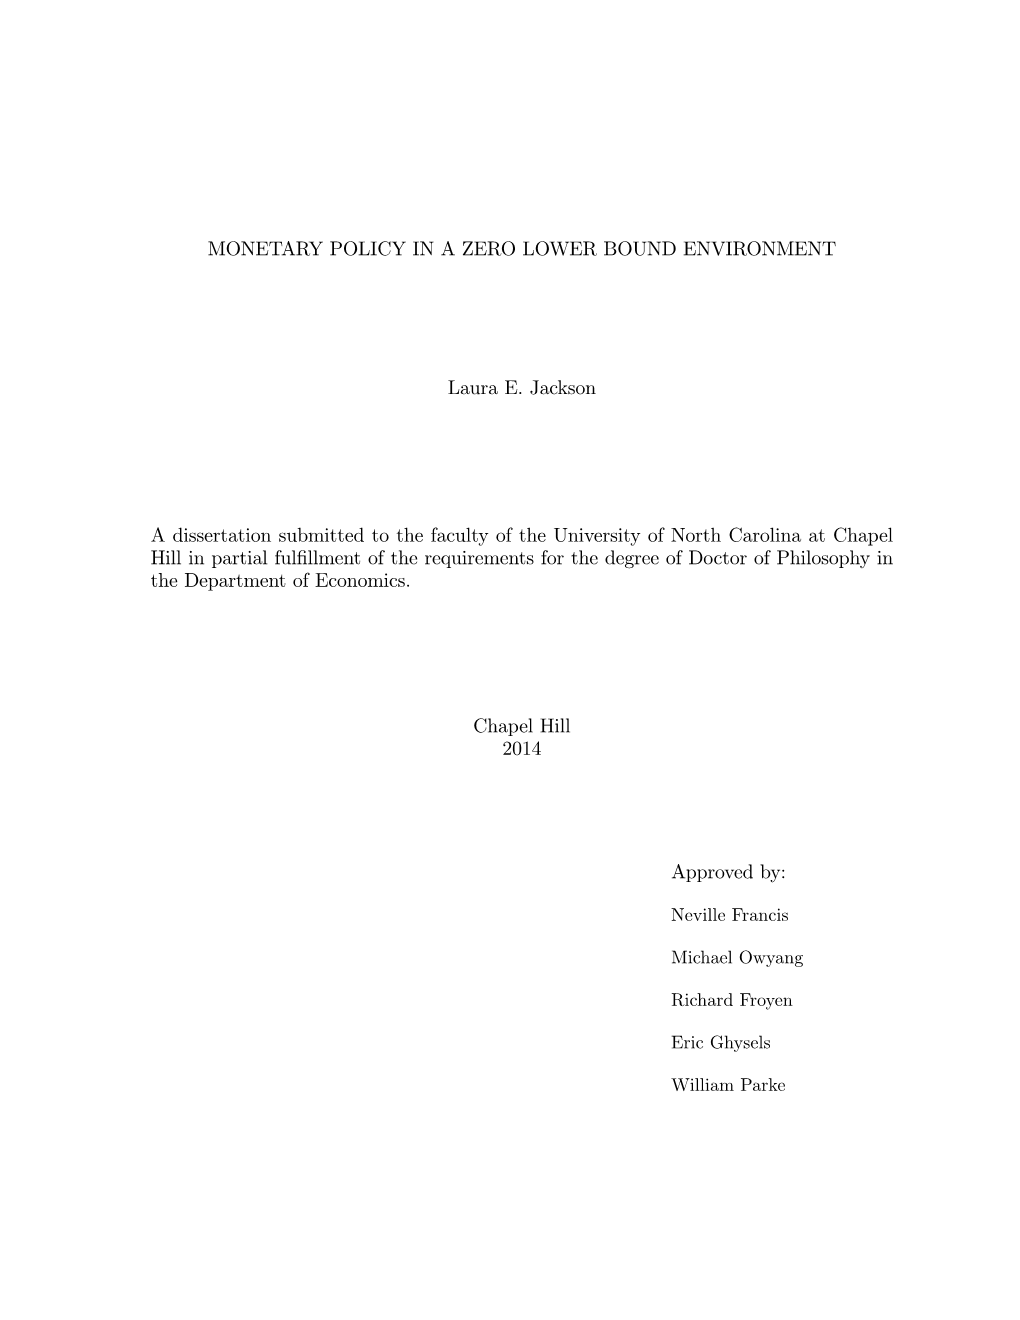 Monetary Policy in a Zero Lower Bound Environment